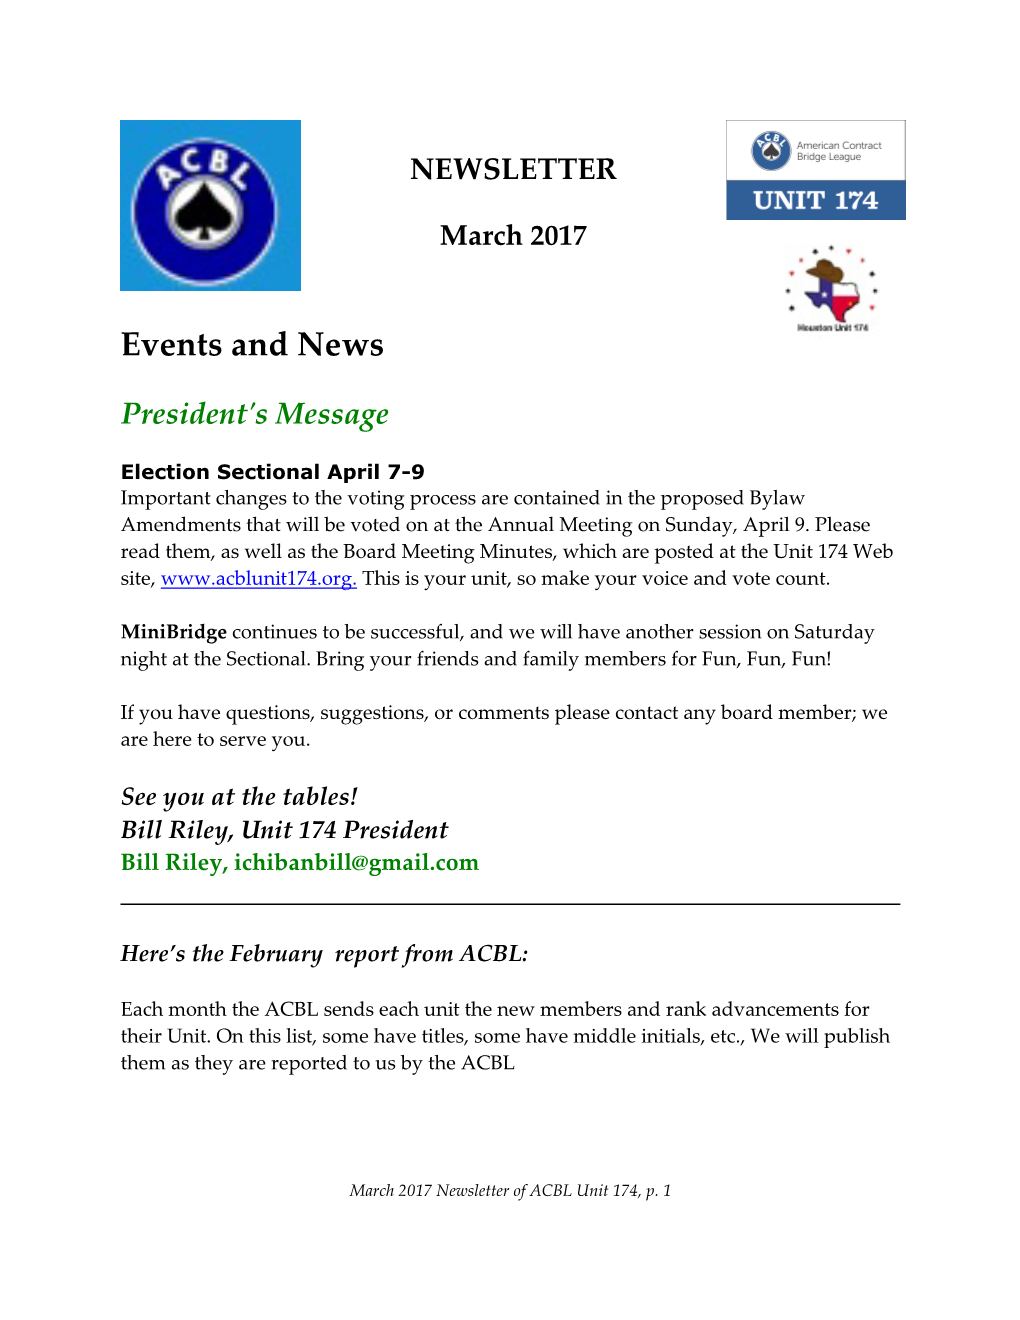 Events and News